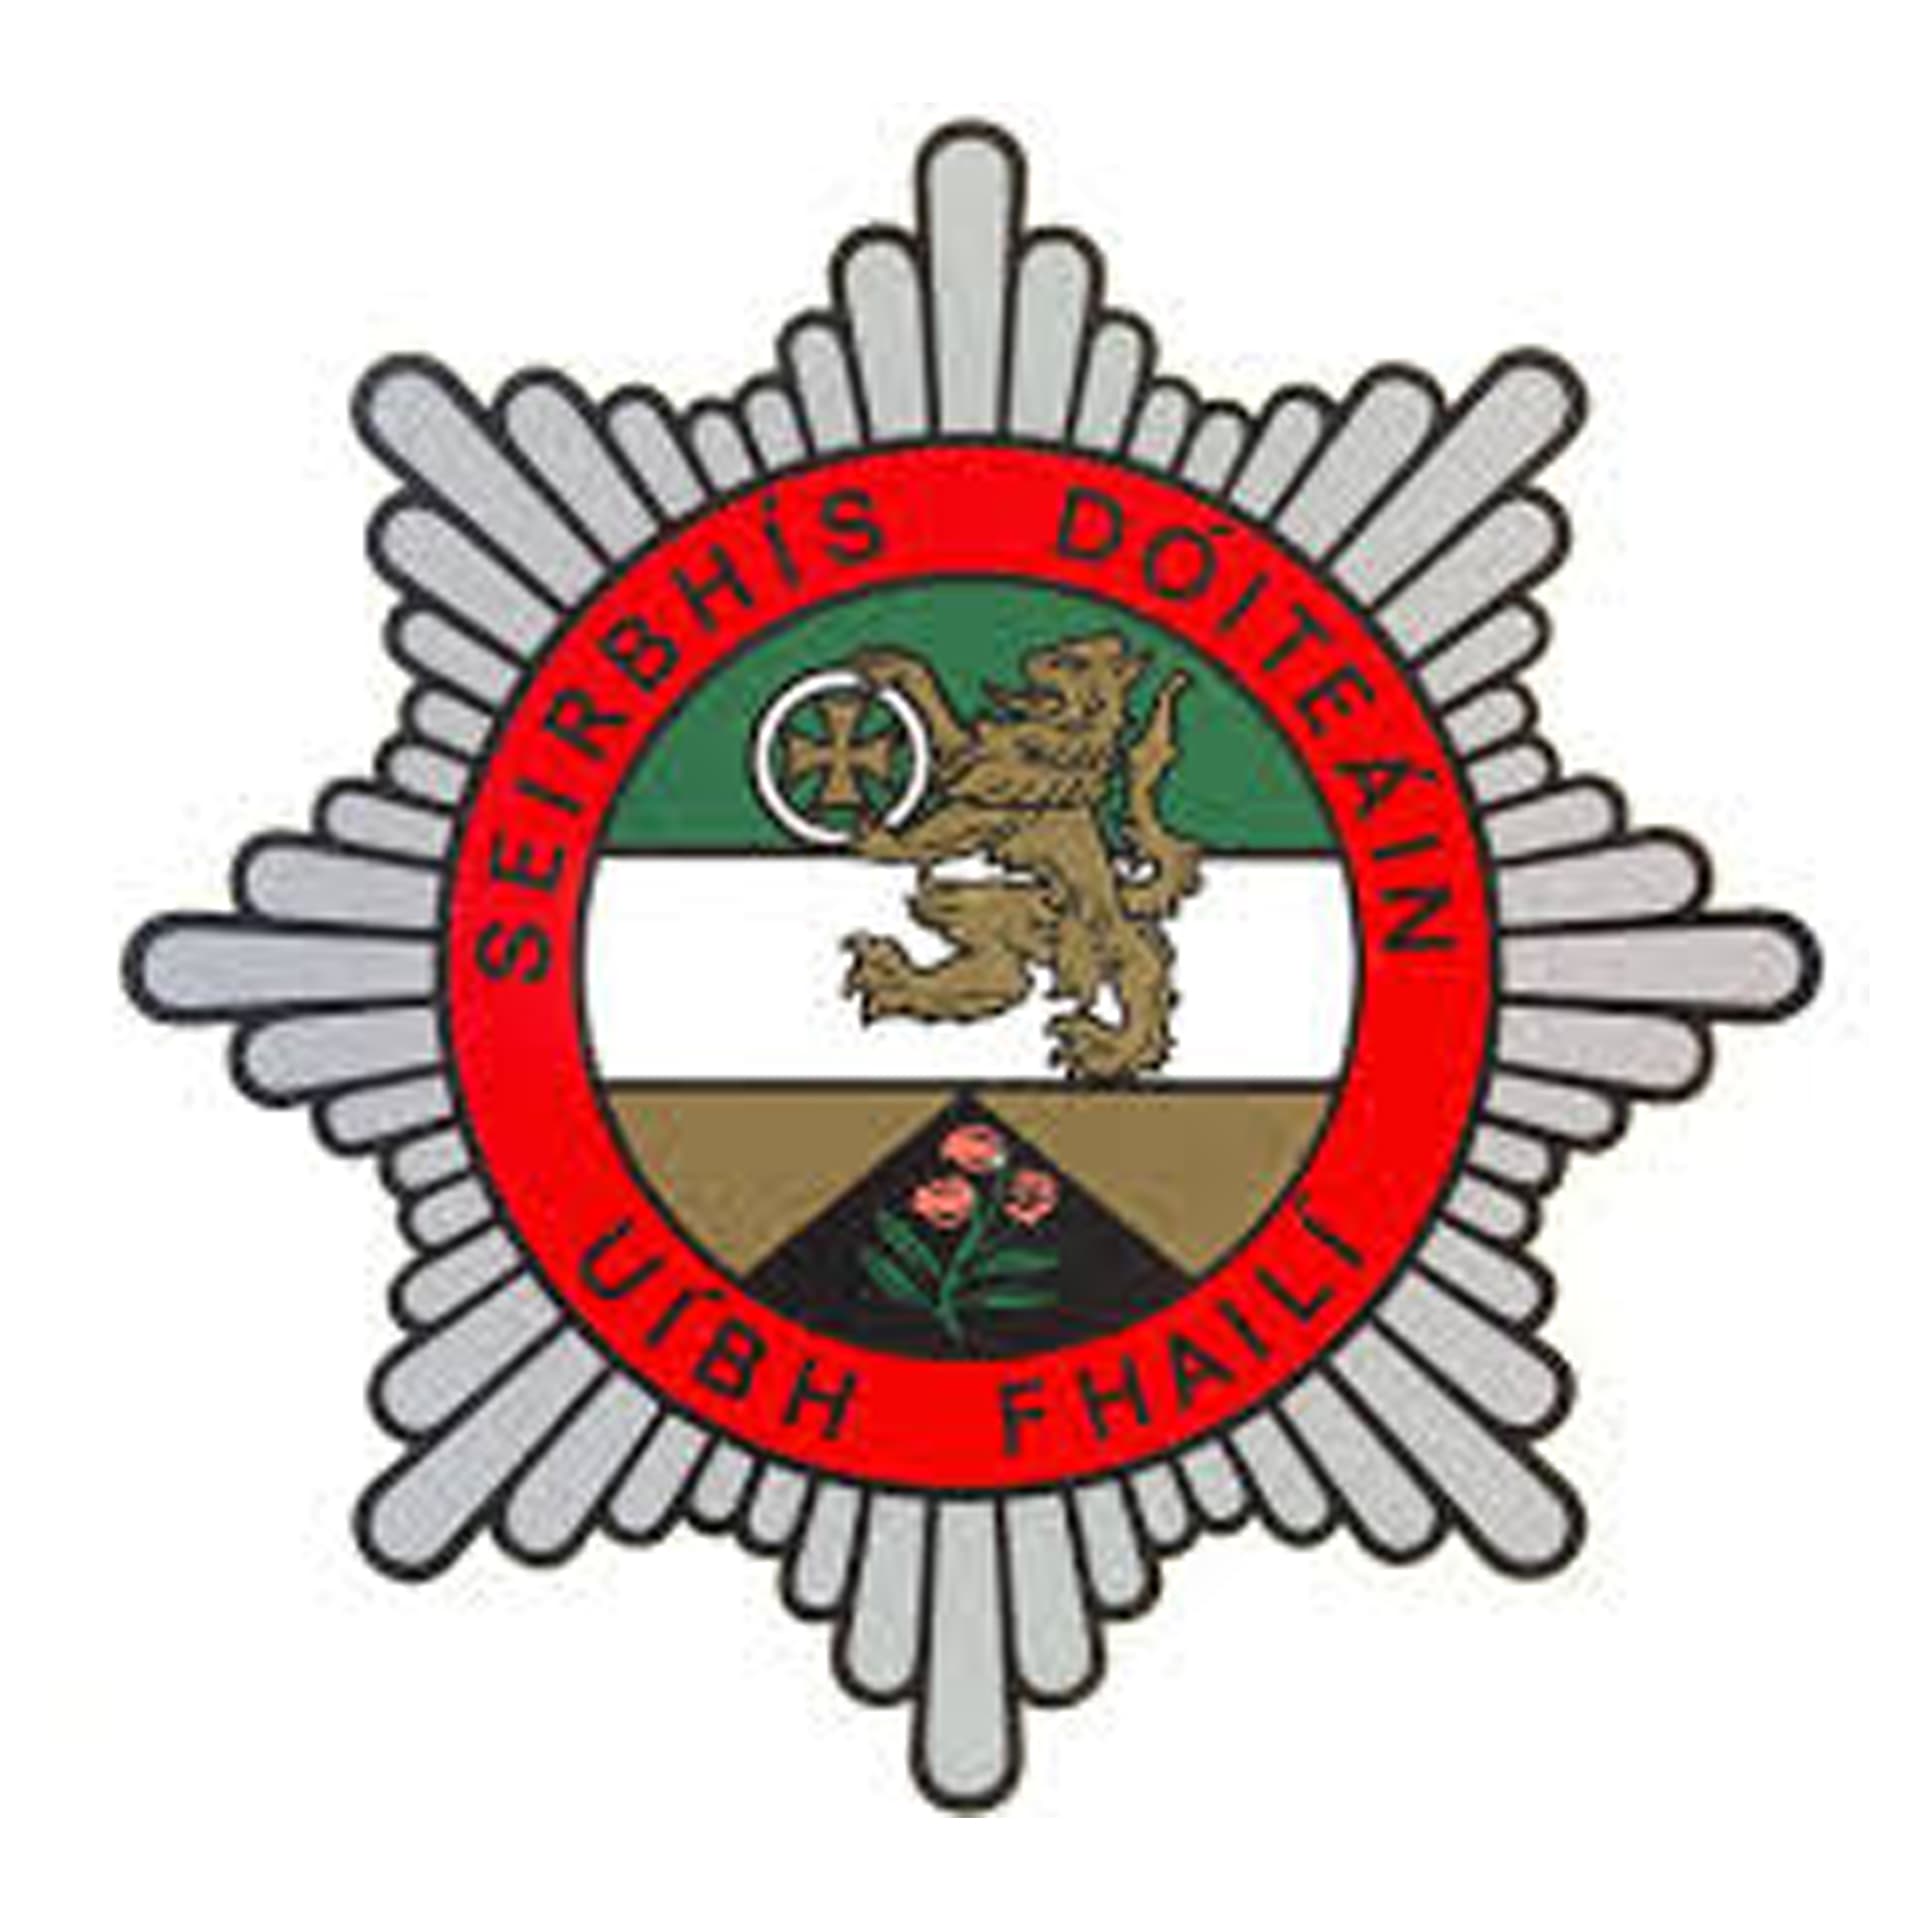 Offaly Fire and Rescue Service